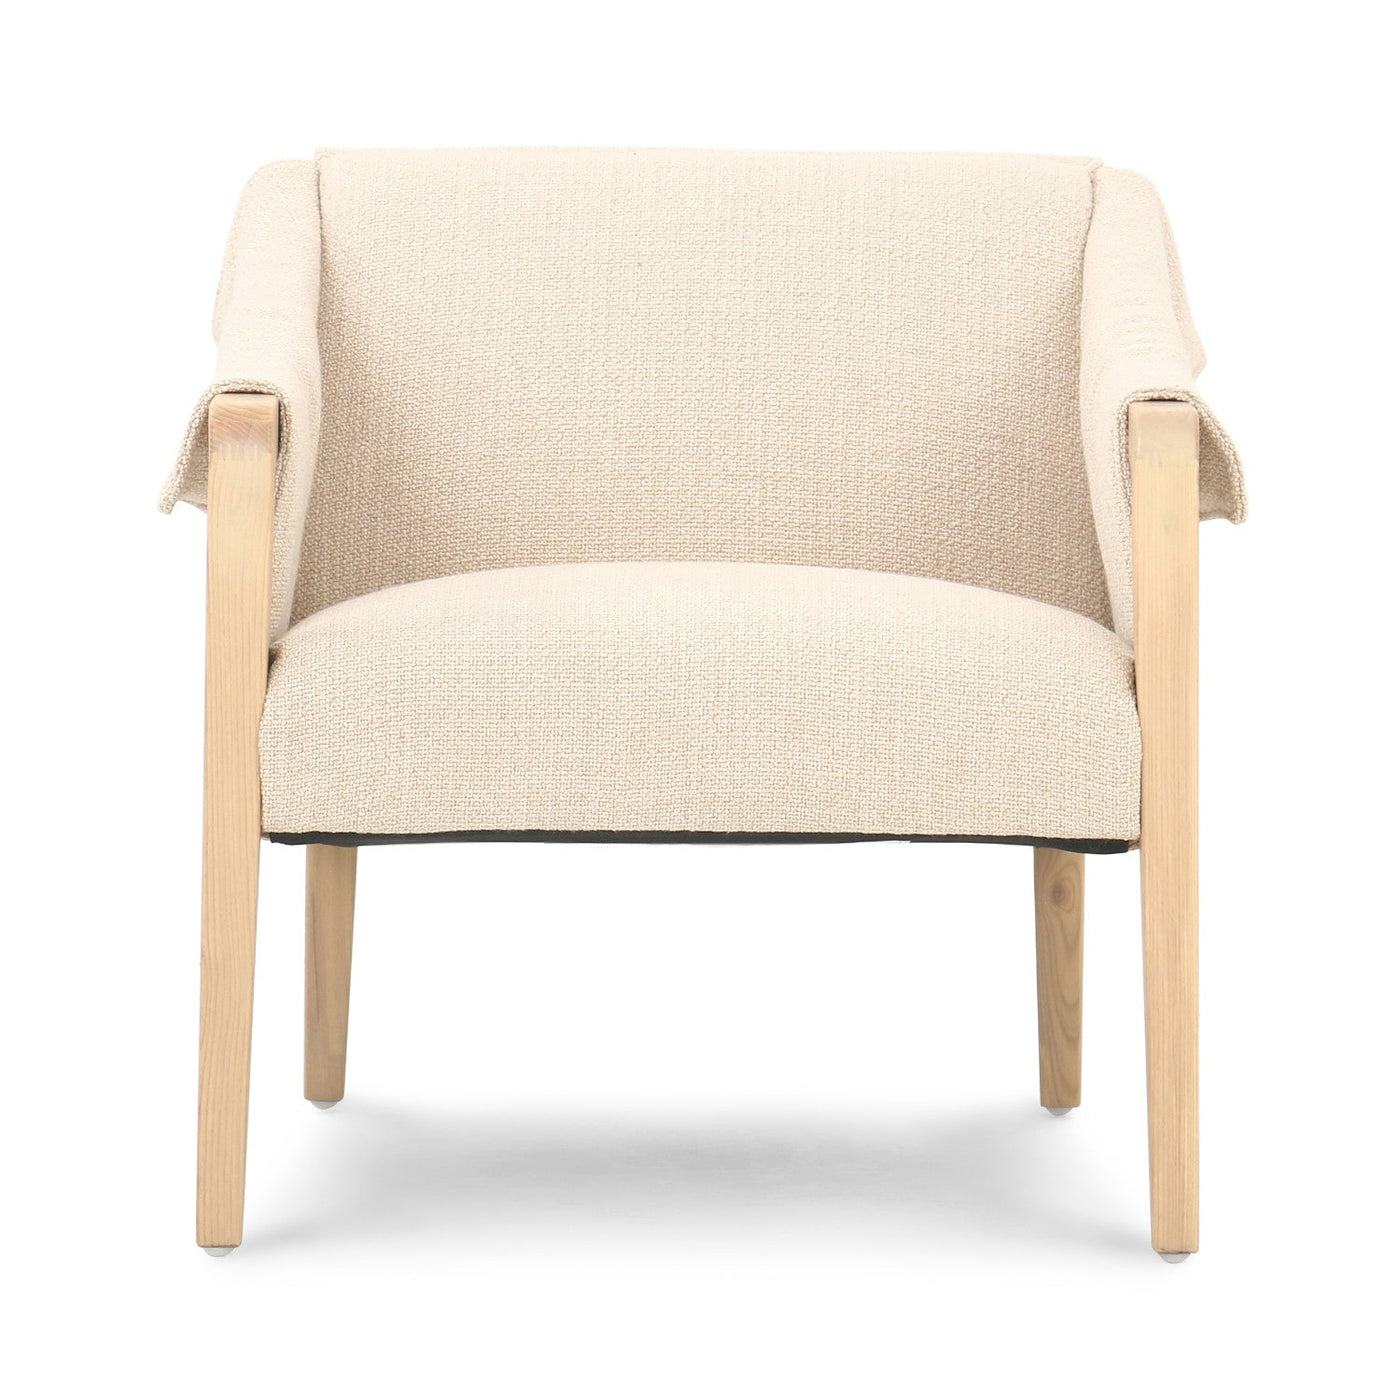 BAUER CHAIR, IRVING FLAX